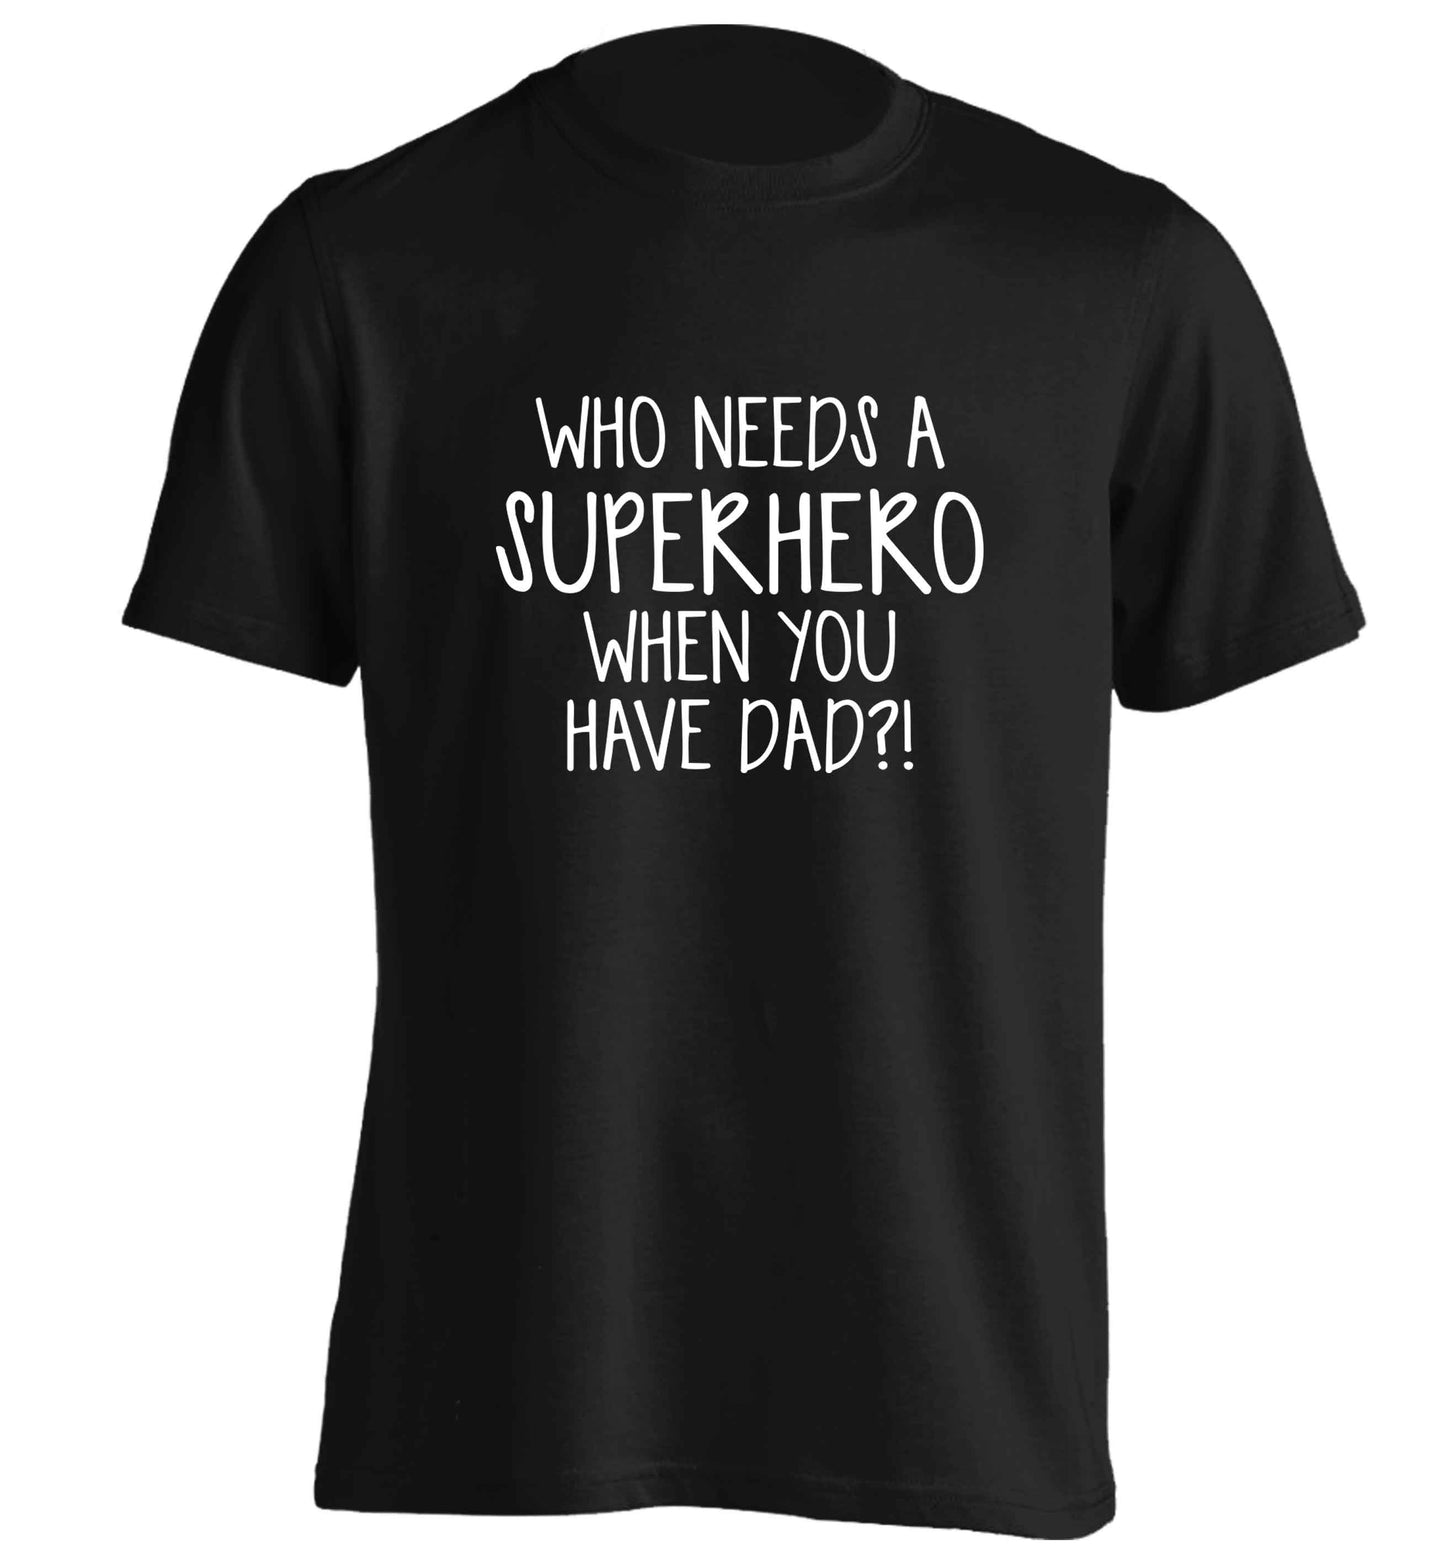 Who needs a superhero when you have dad! adults unisex black Tshirt 2XL